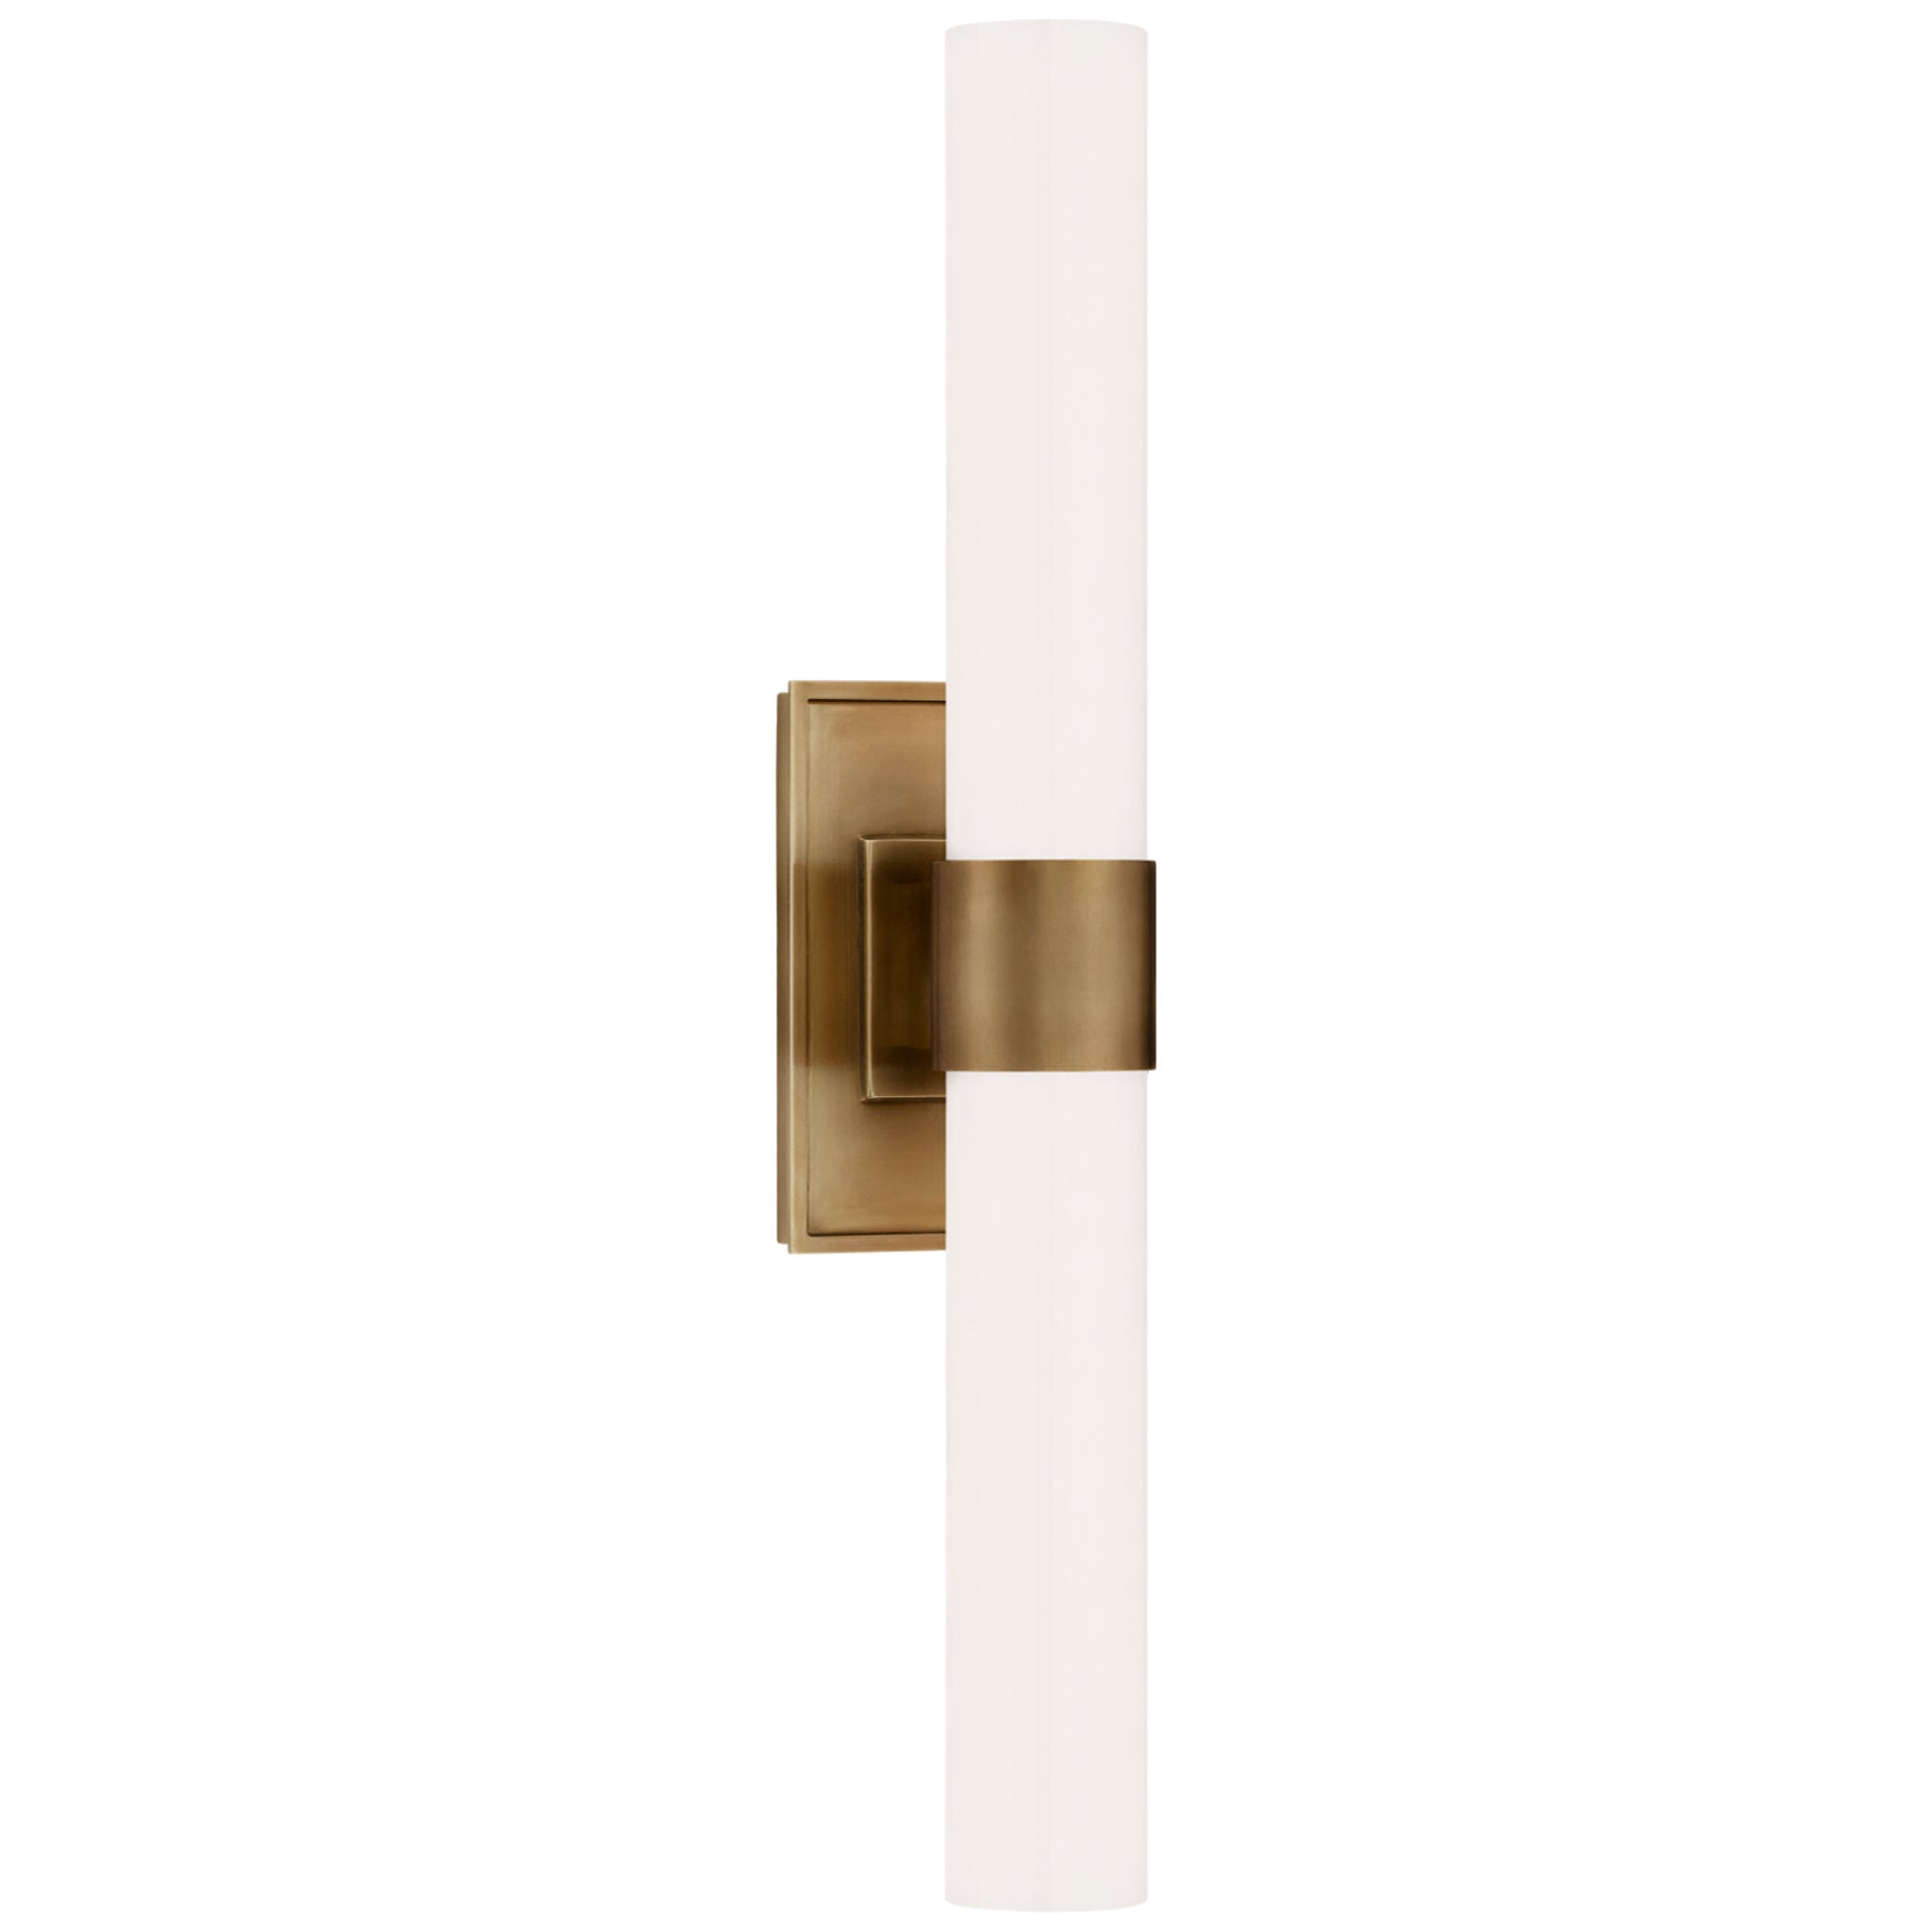 Ian K. Fowler Presidio Petite Double Sconce in Hand-Rubbed Antique Brass with White Glass